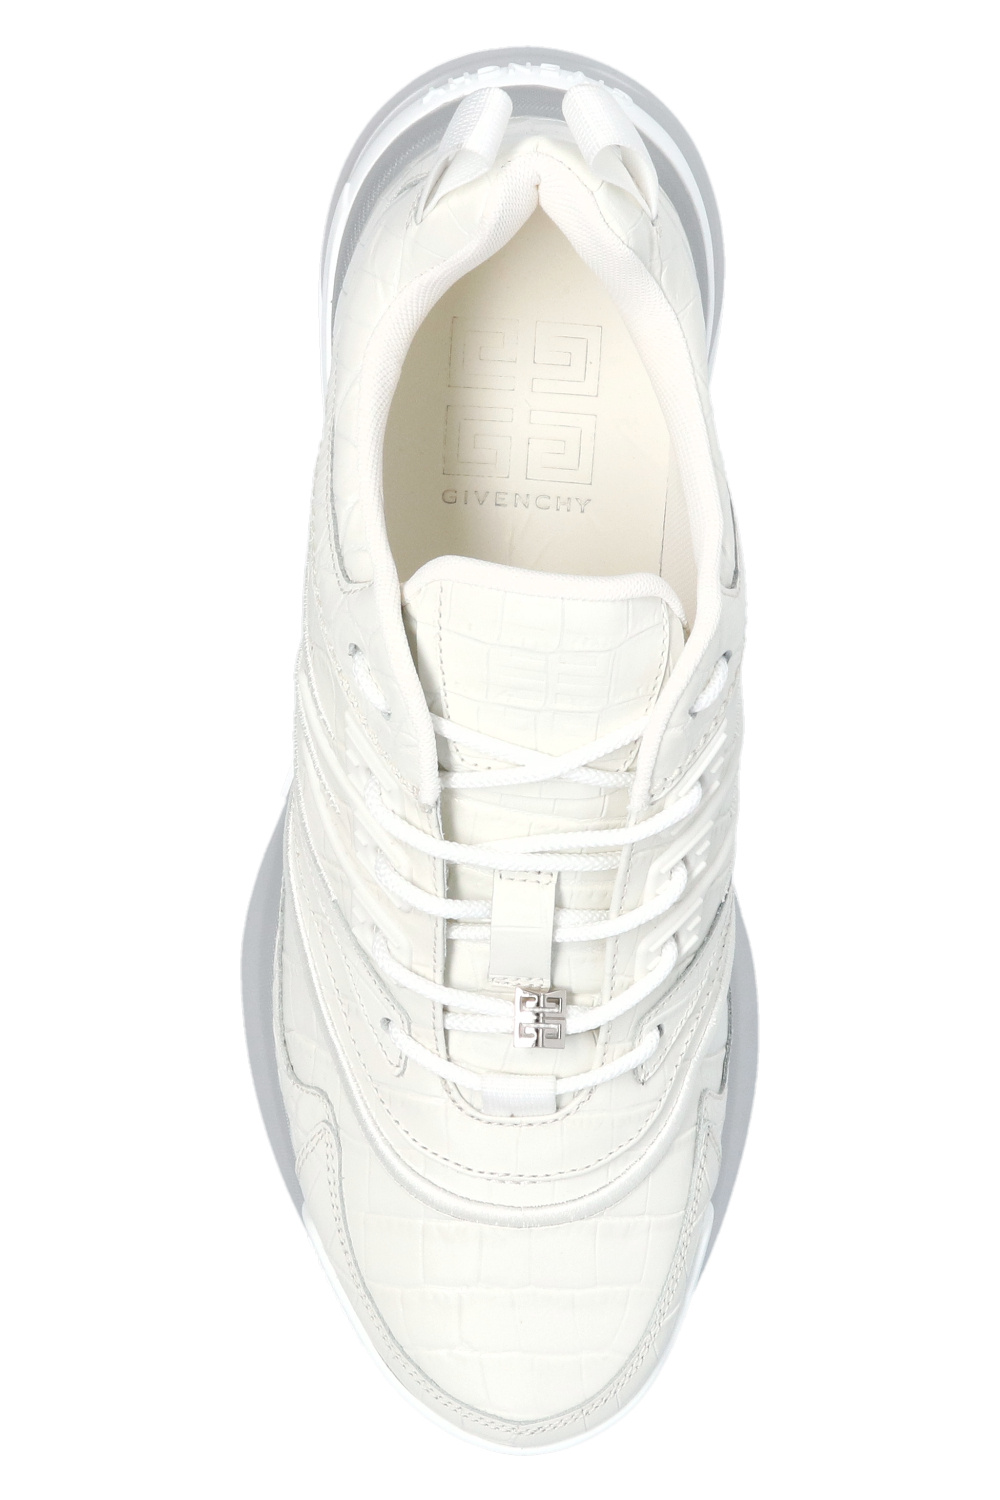 givenchy size ‘Giv 1’ sneakers